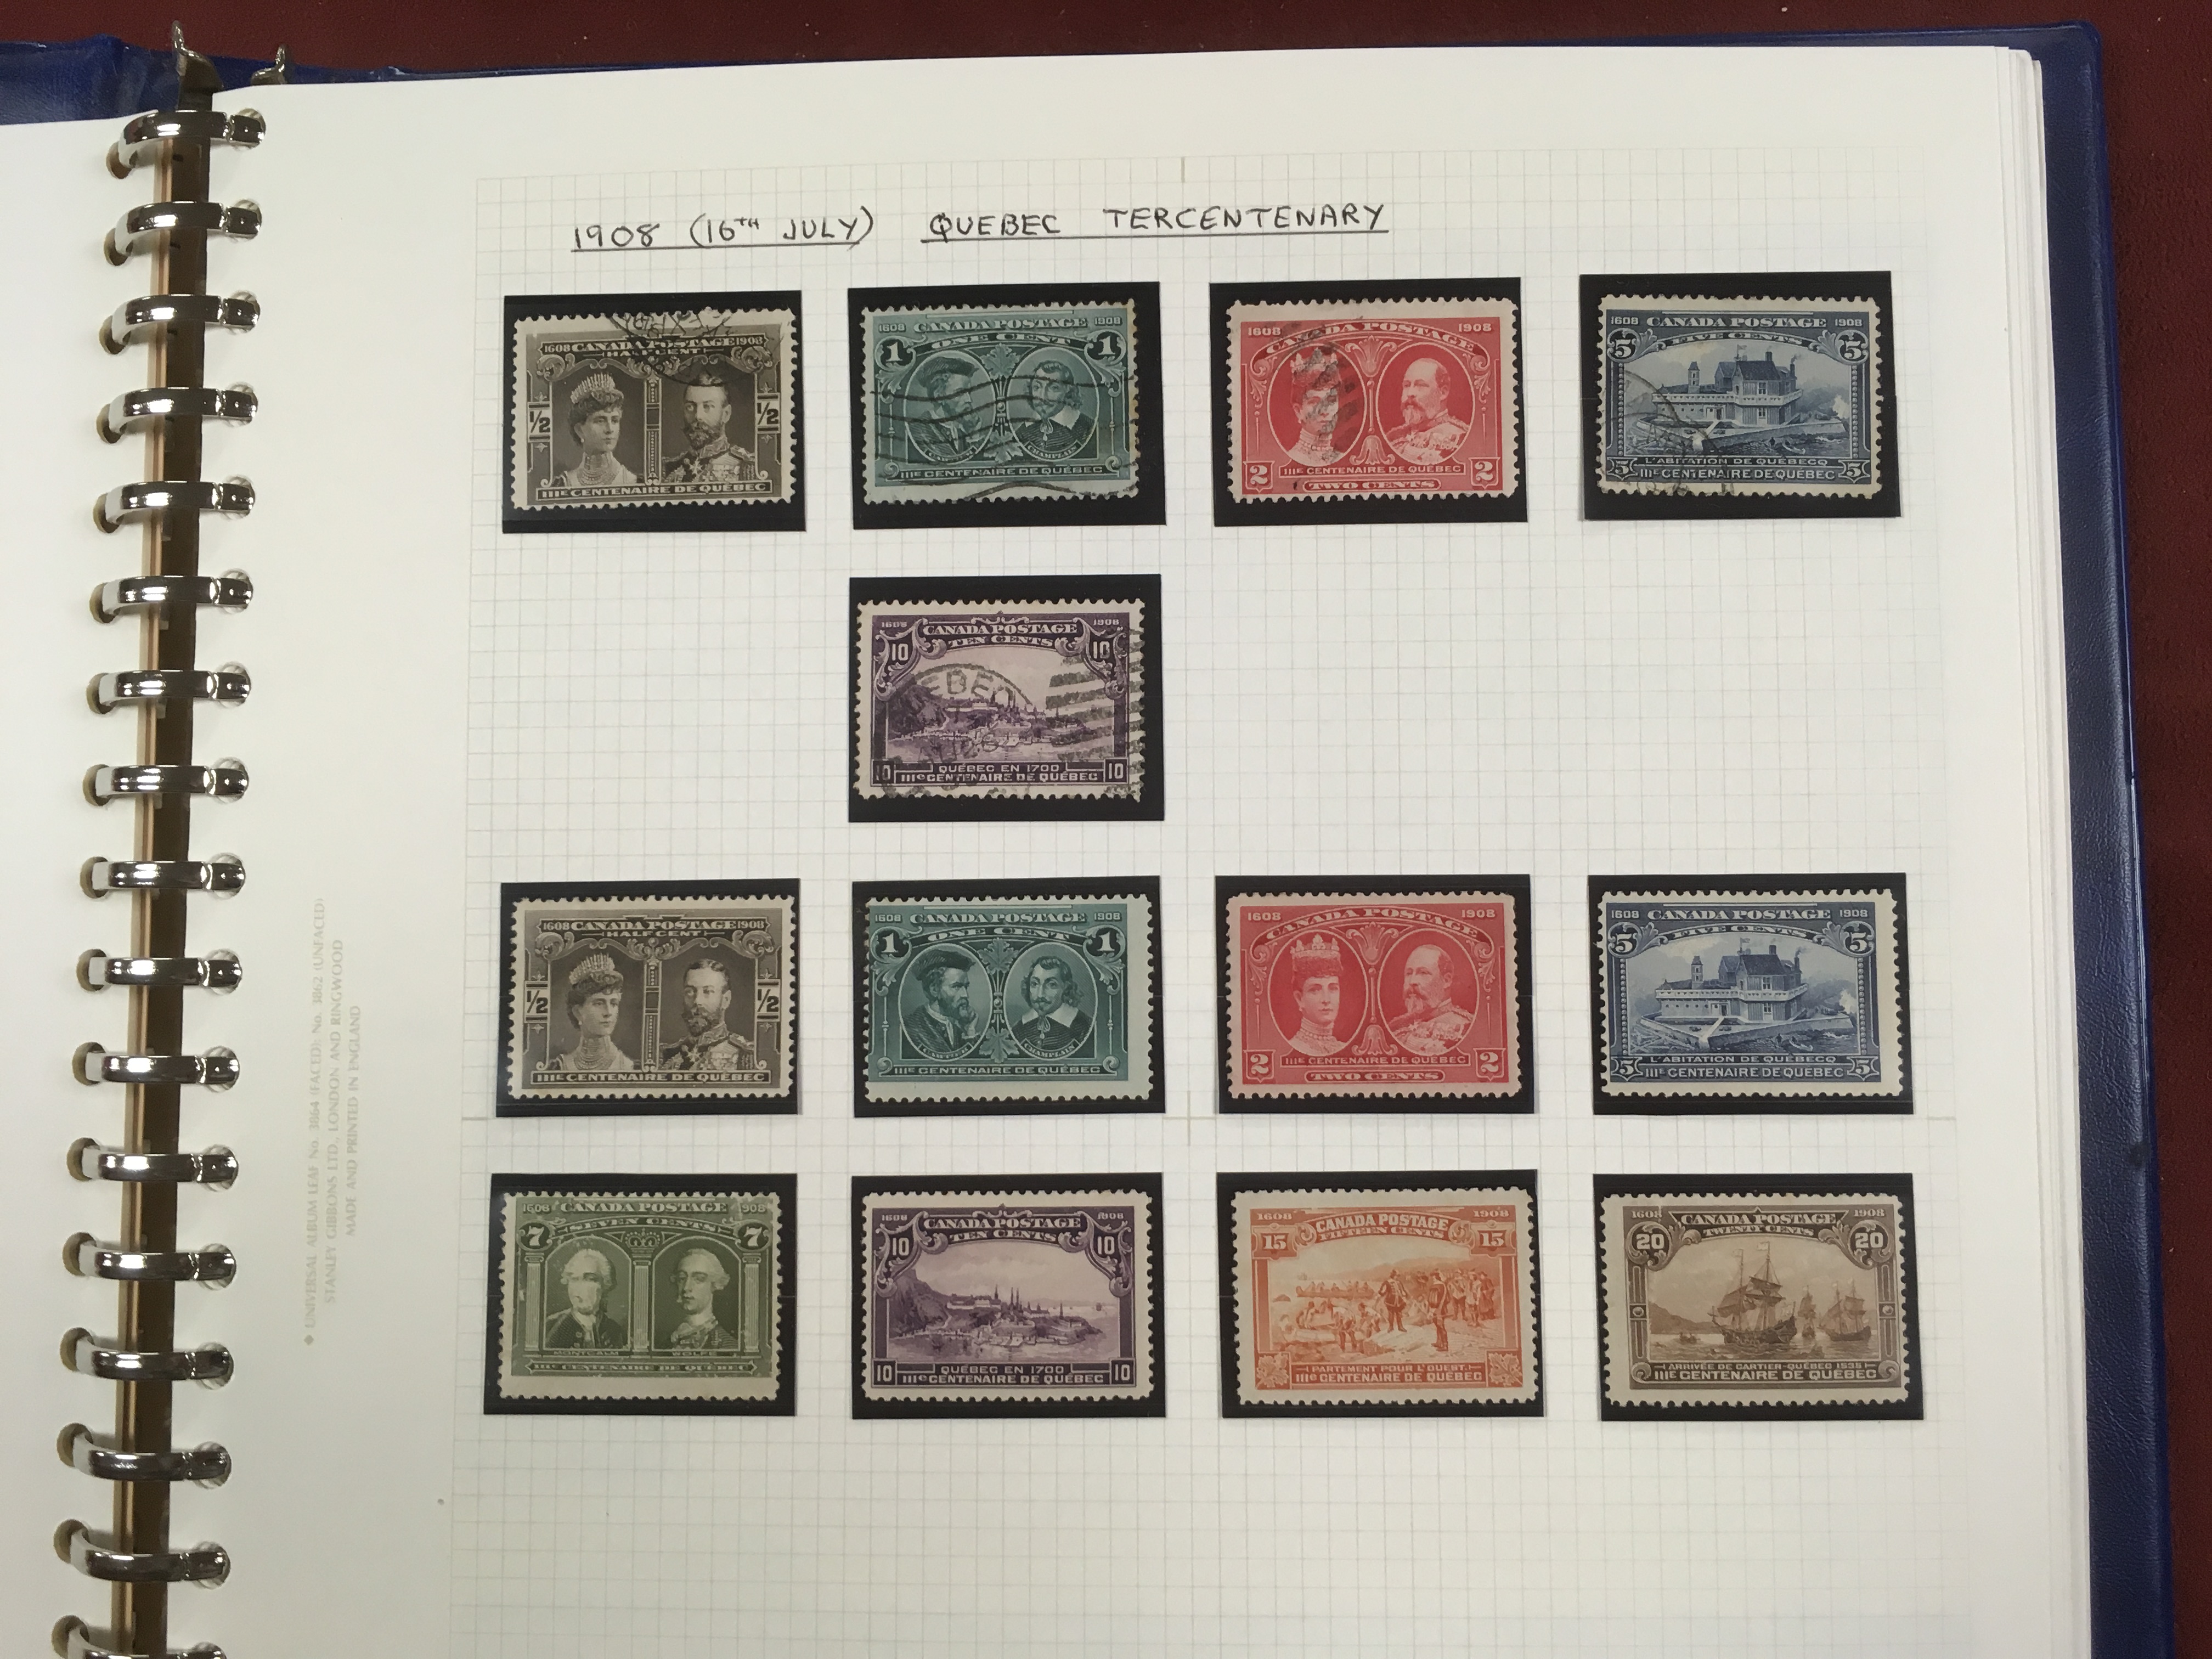 CANADA: 1859-1999 COLLECTION IN TWO ALBU - Image 3 of 4